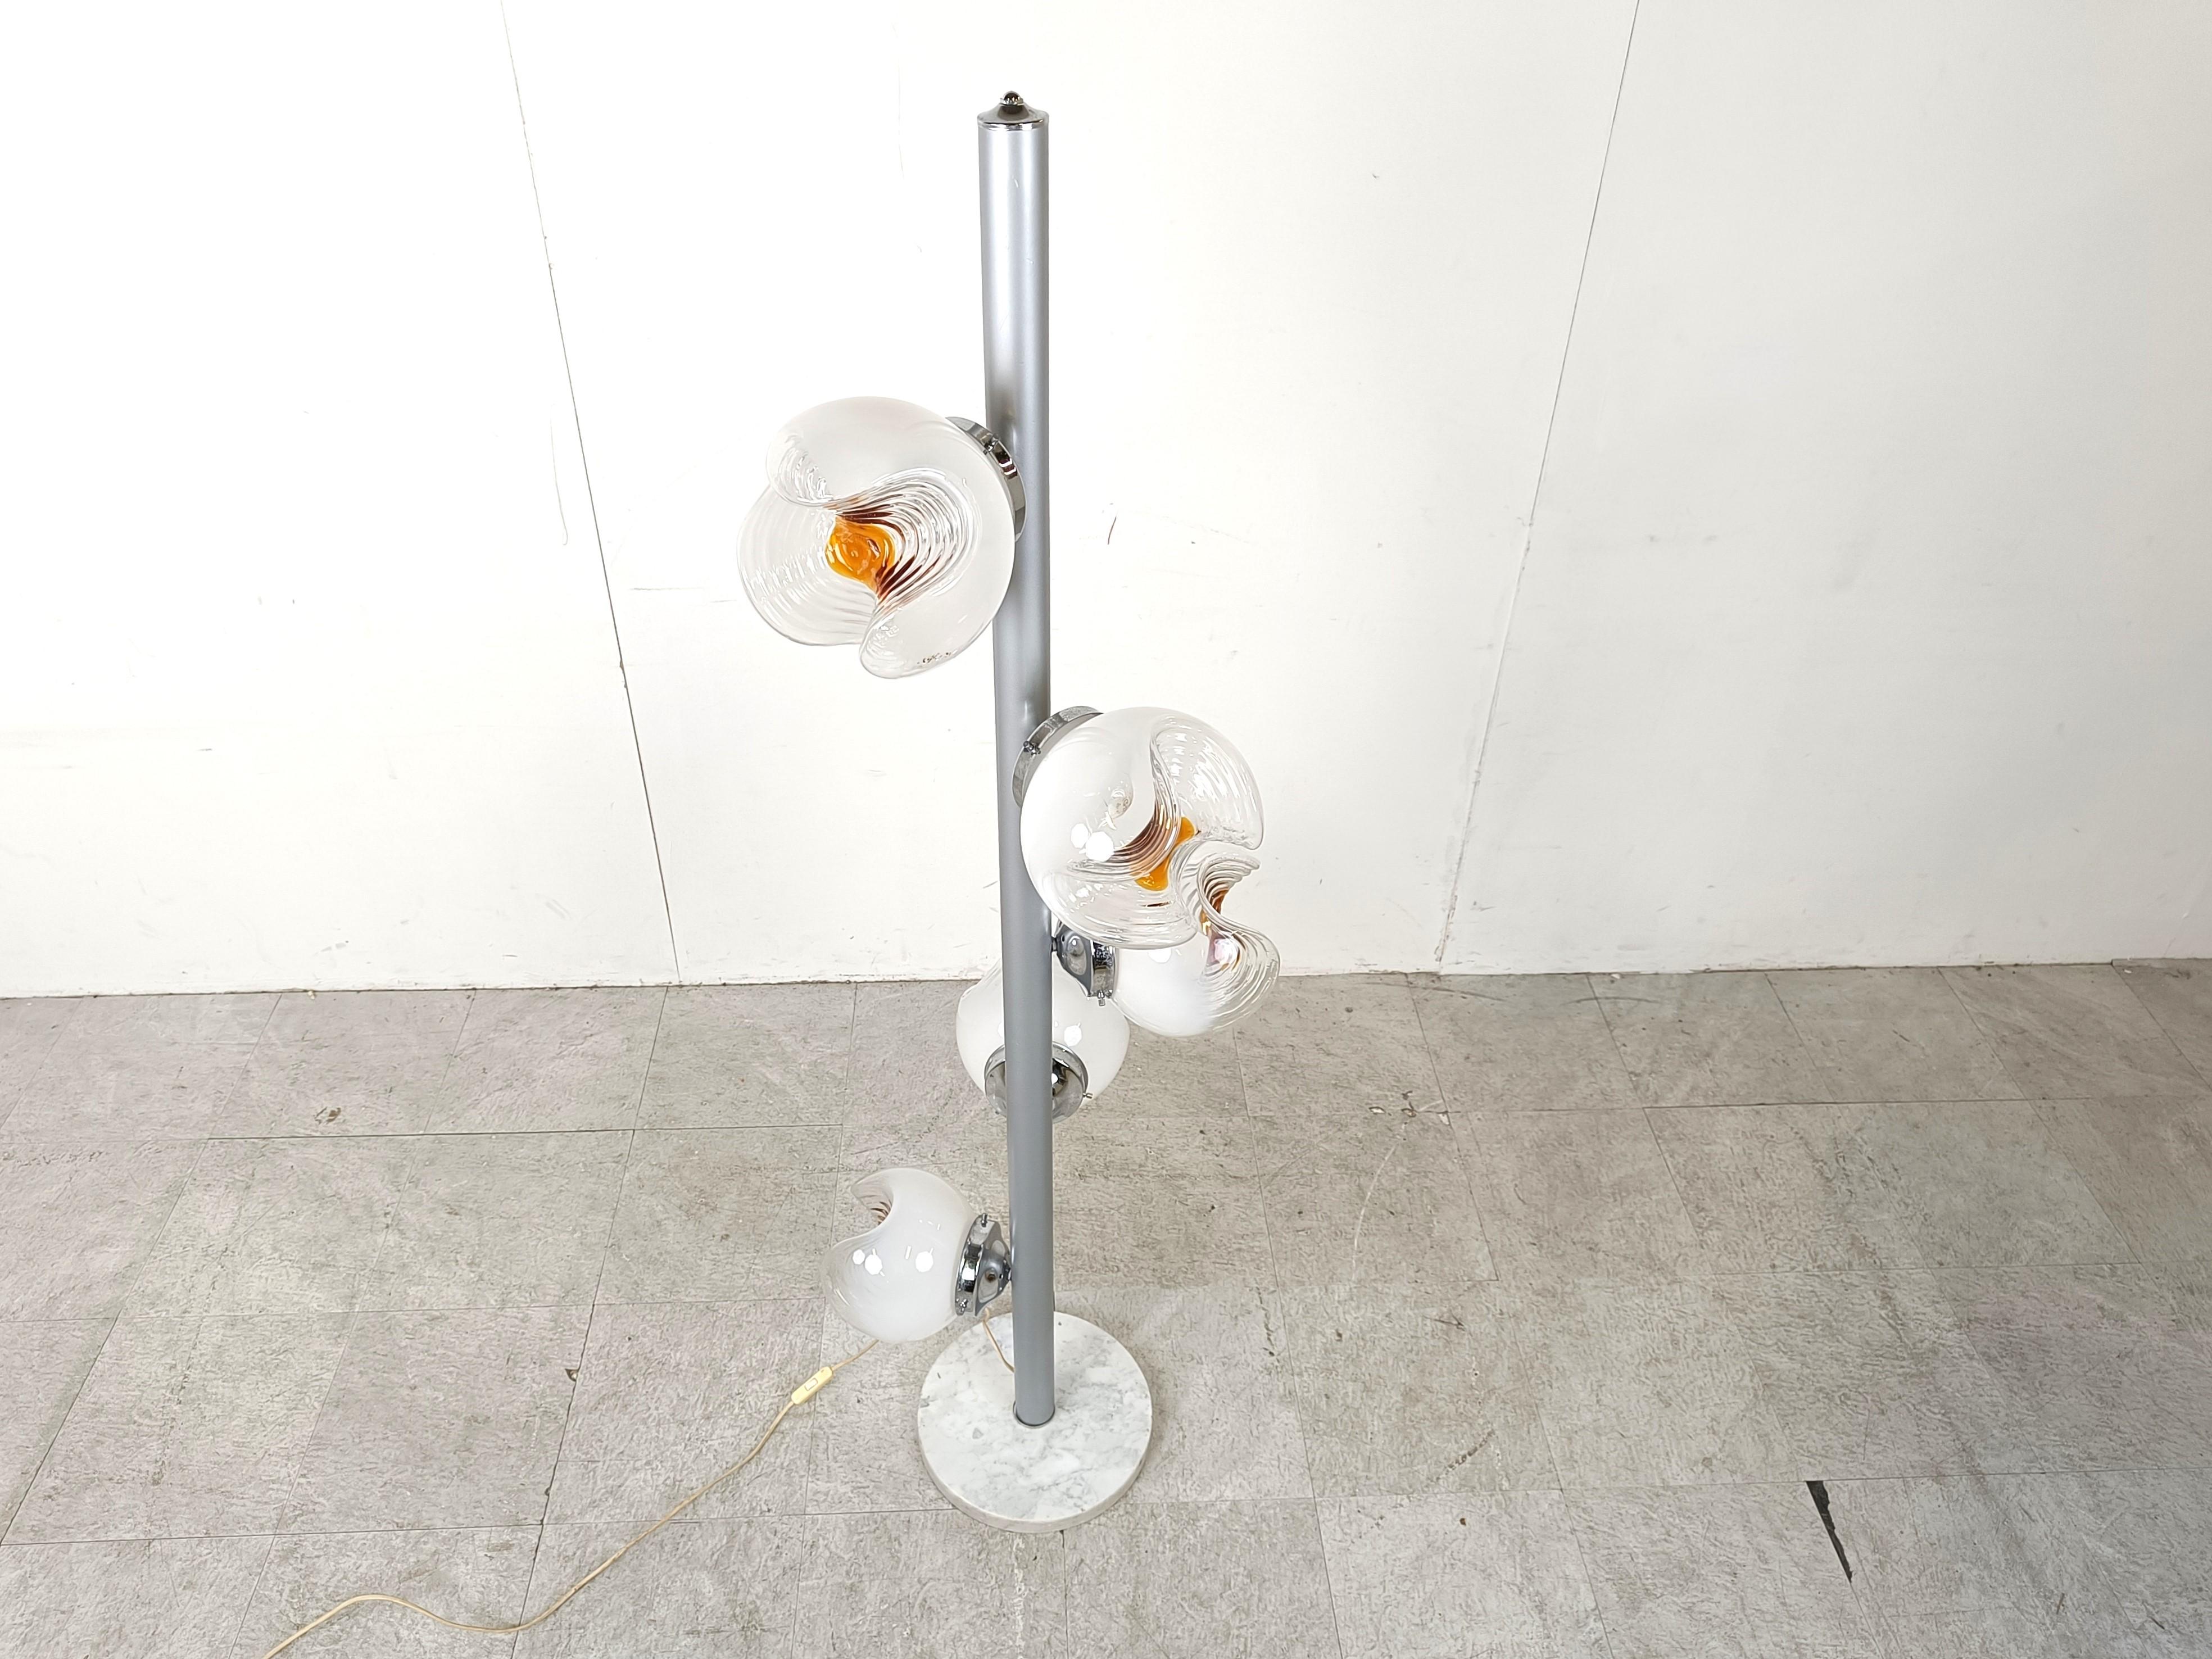 Rare mid century floor lamp by AV Mazzega.

The lamp has a round white marble base a grey metal rod and 5 murano glass white/transparant and orange glass globes.

The lamp emits a beautiful light.

Good condition.

Tested and ready to use. 

1970s -